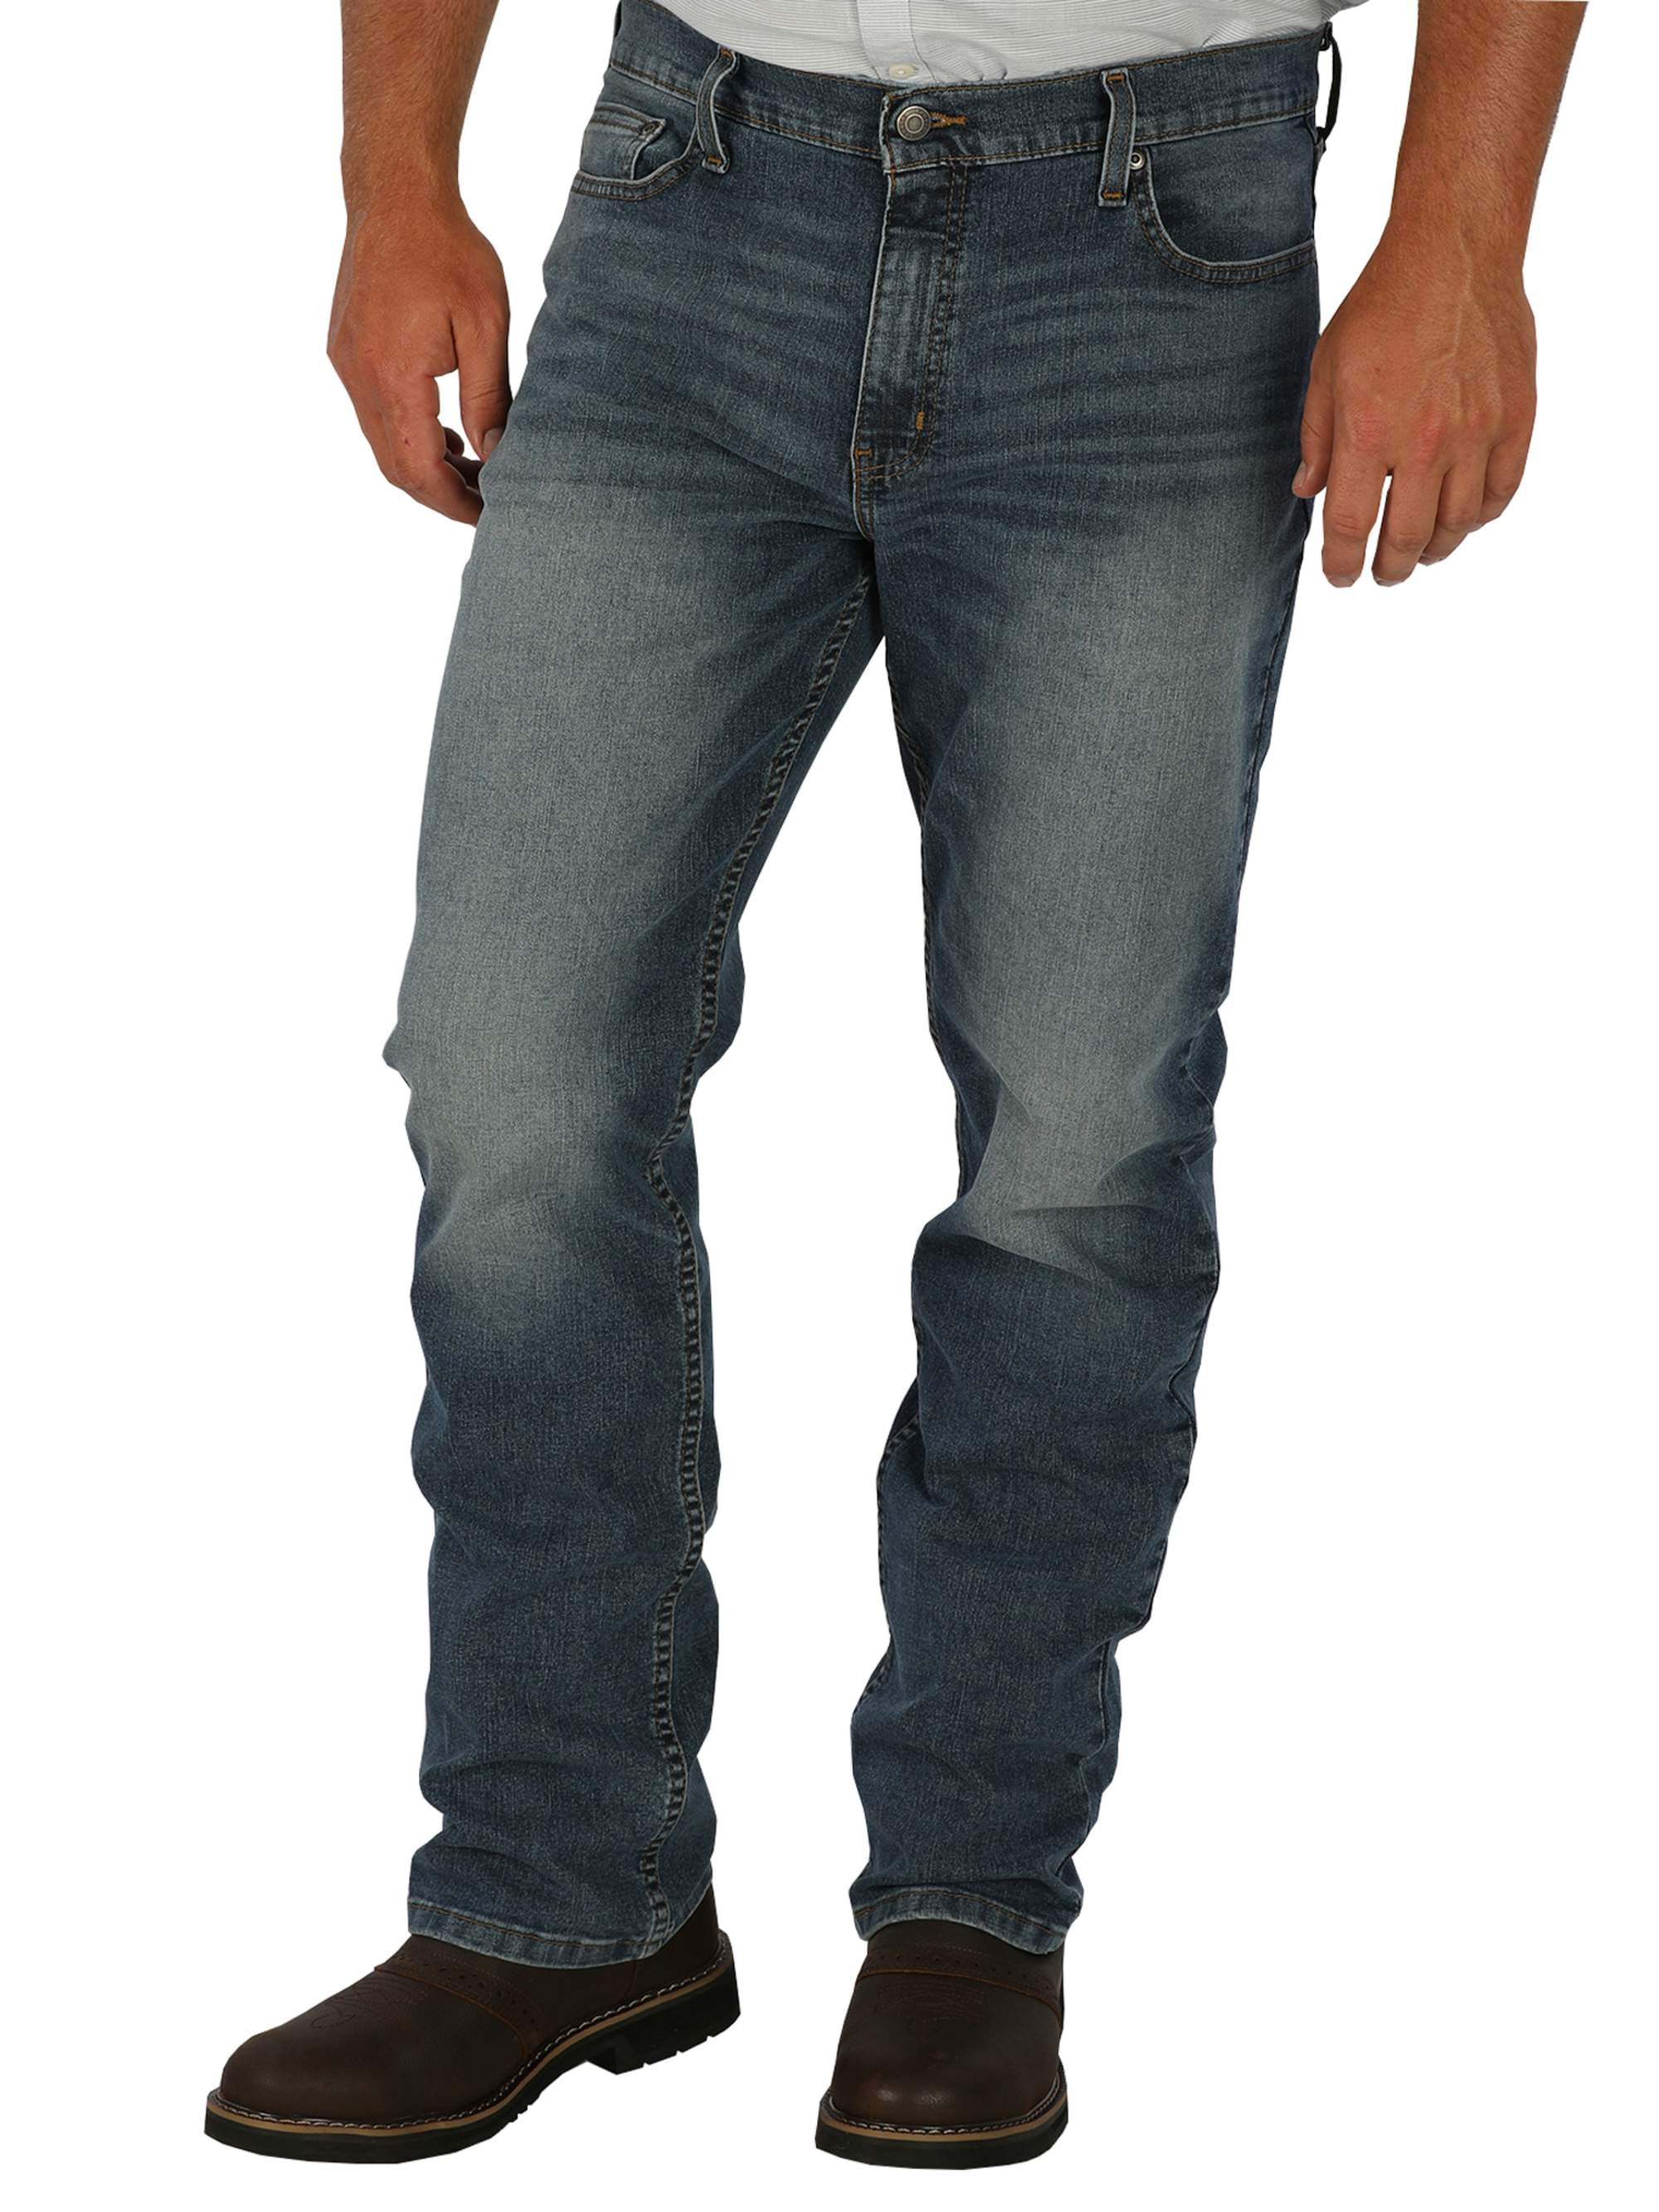 George Men's Bootcut Fit Jeans with Flex